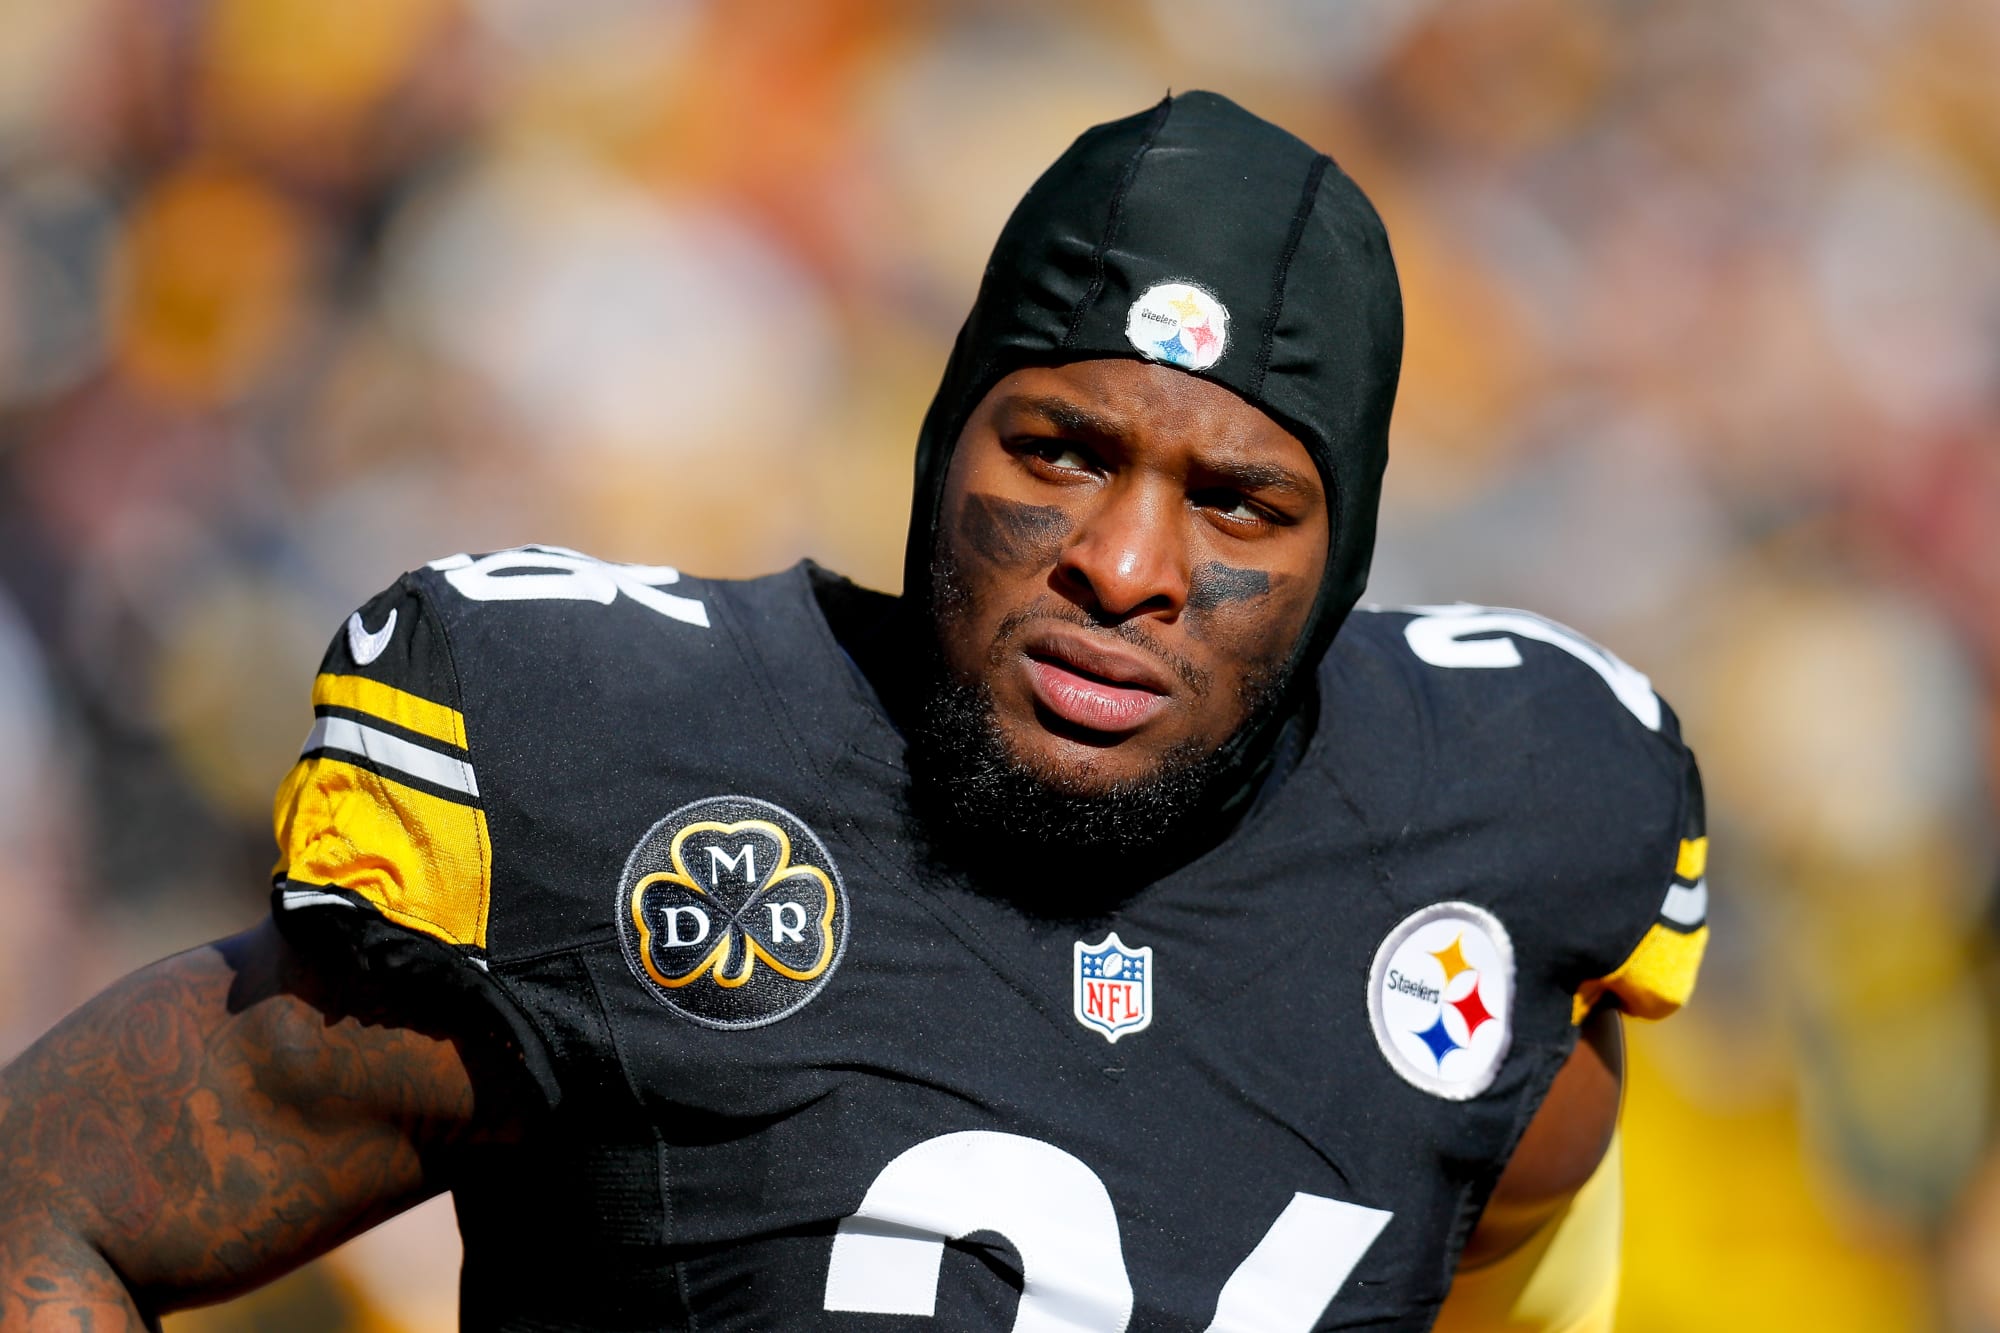 Le’Veon Bell claims he smoked marijuana before NFL games